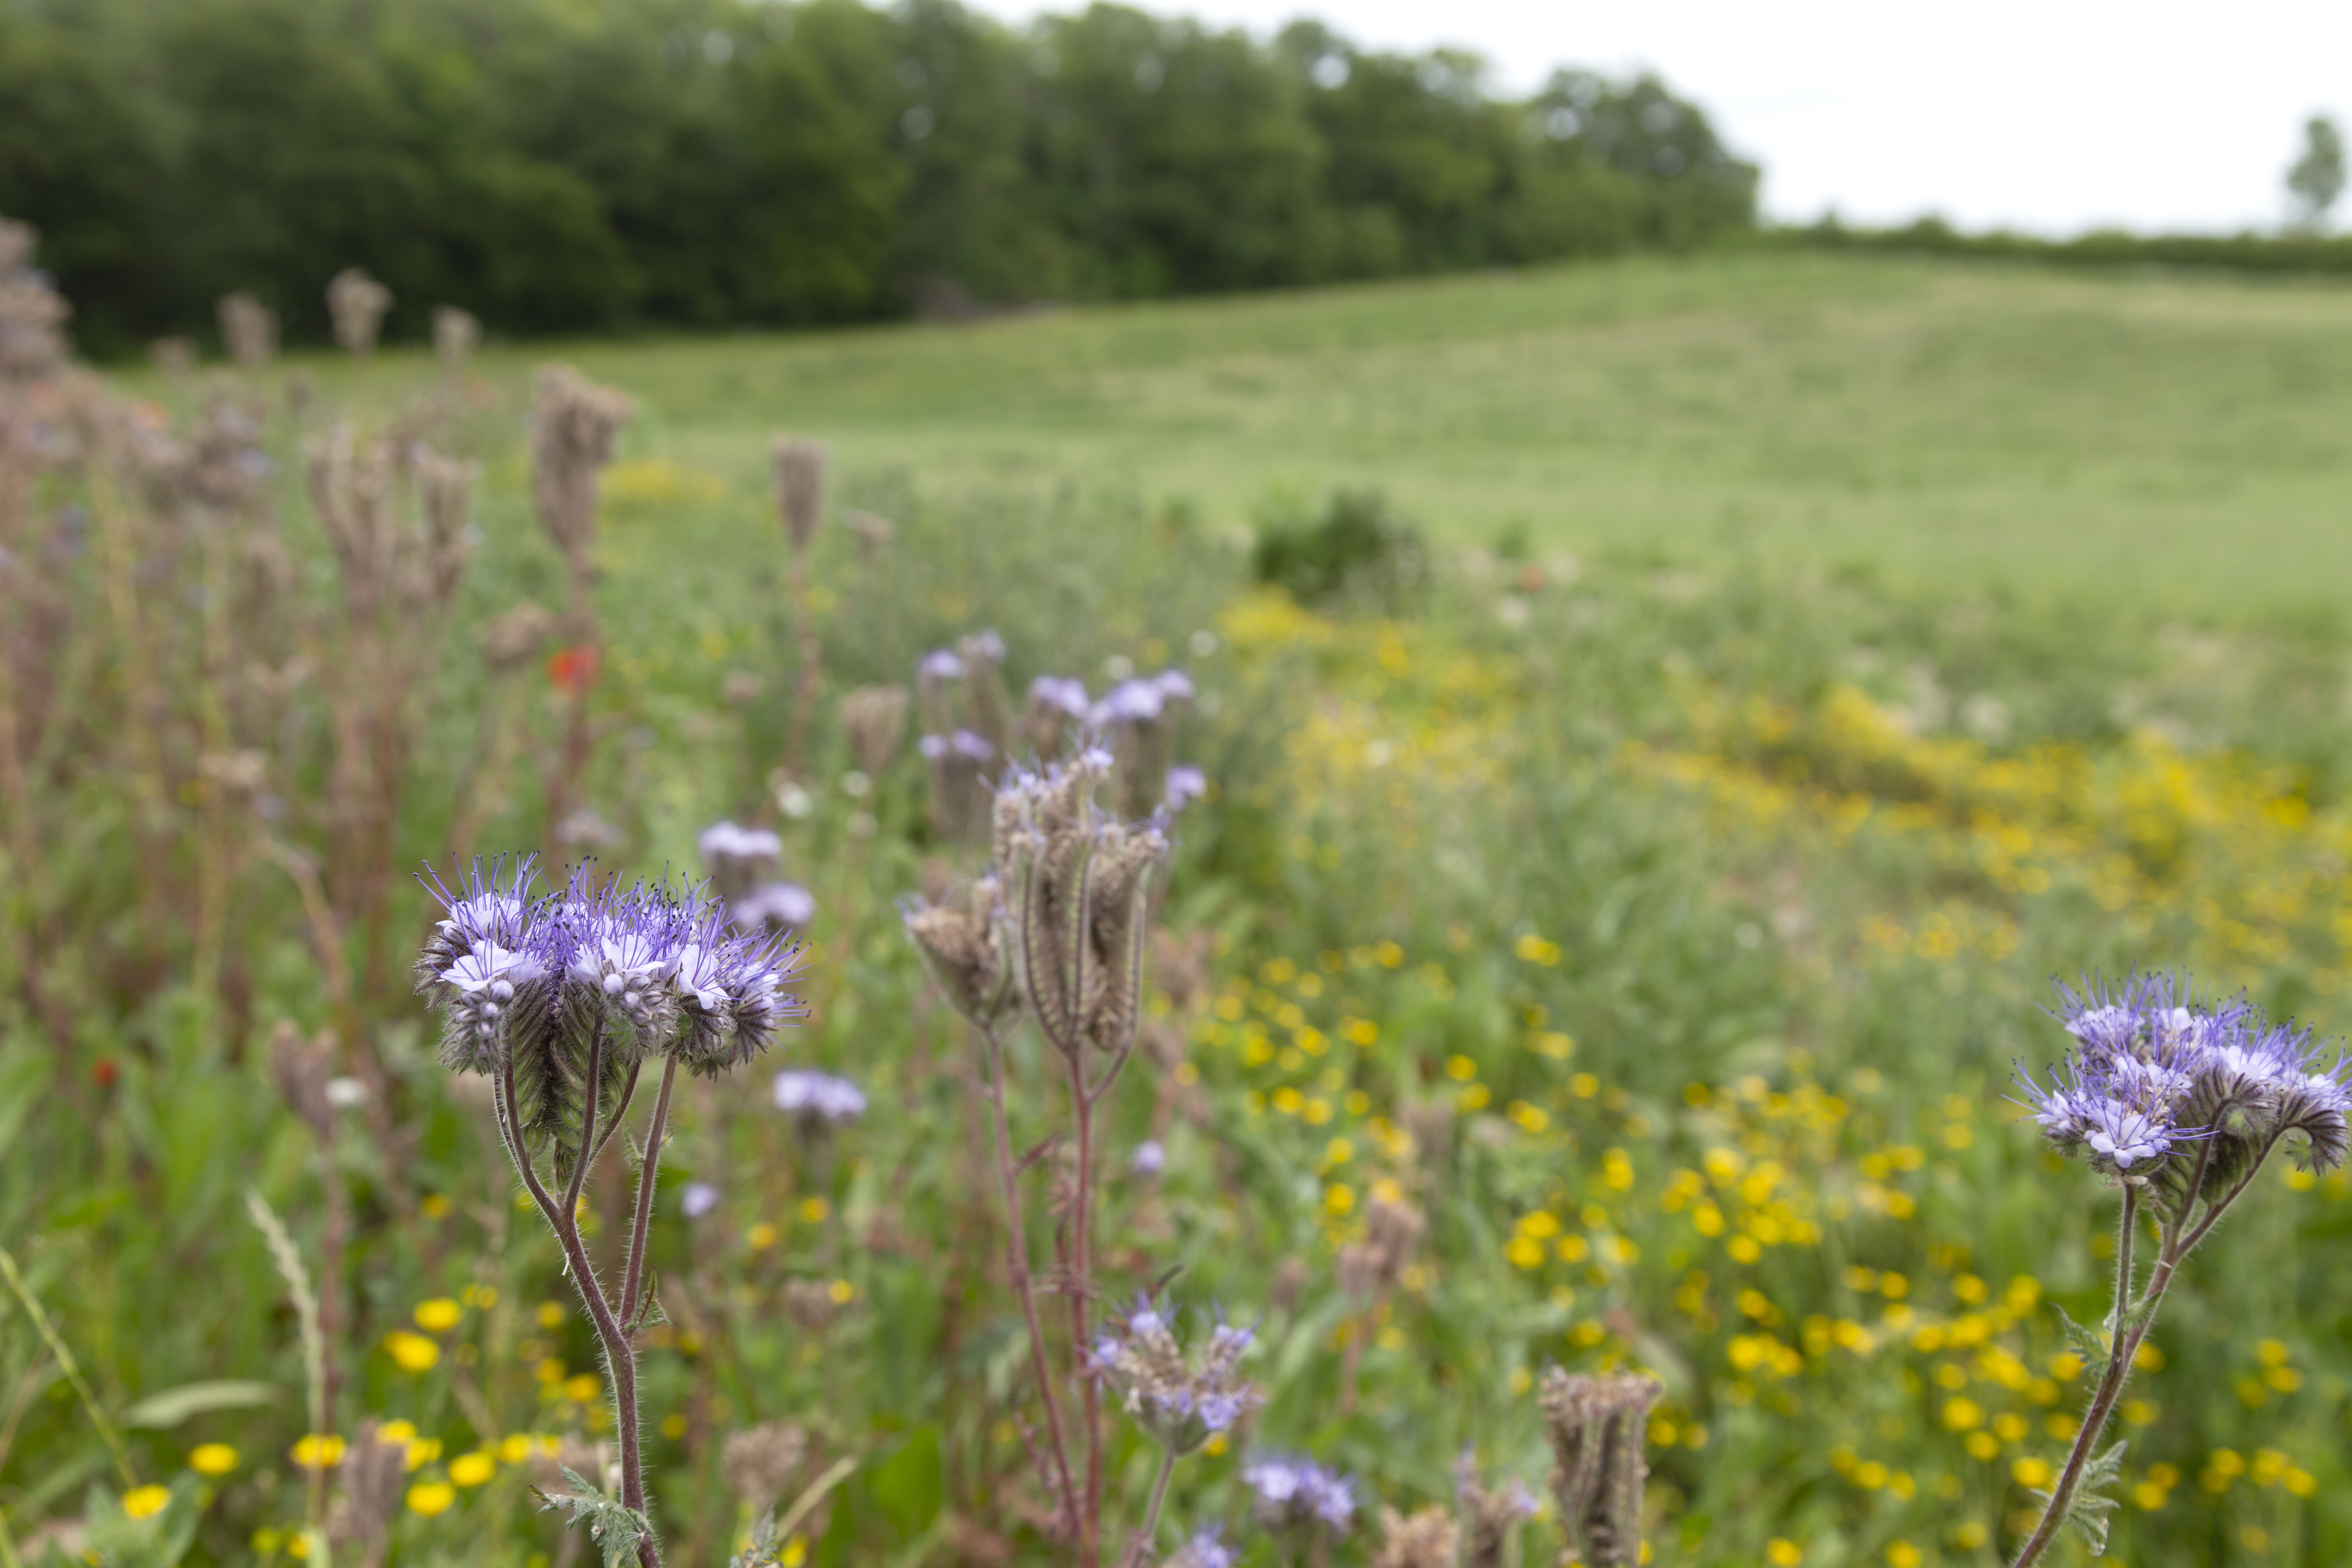 Field margins planted with phacelia which attracts pollinating insects (Phil Morley)